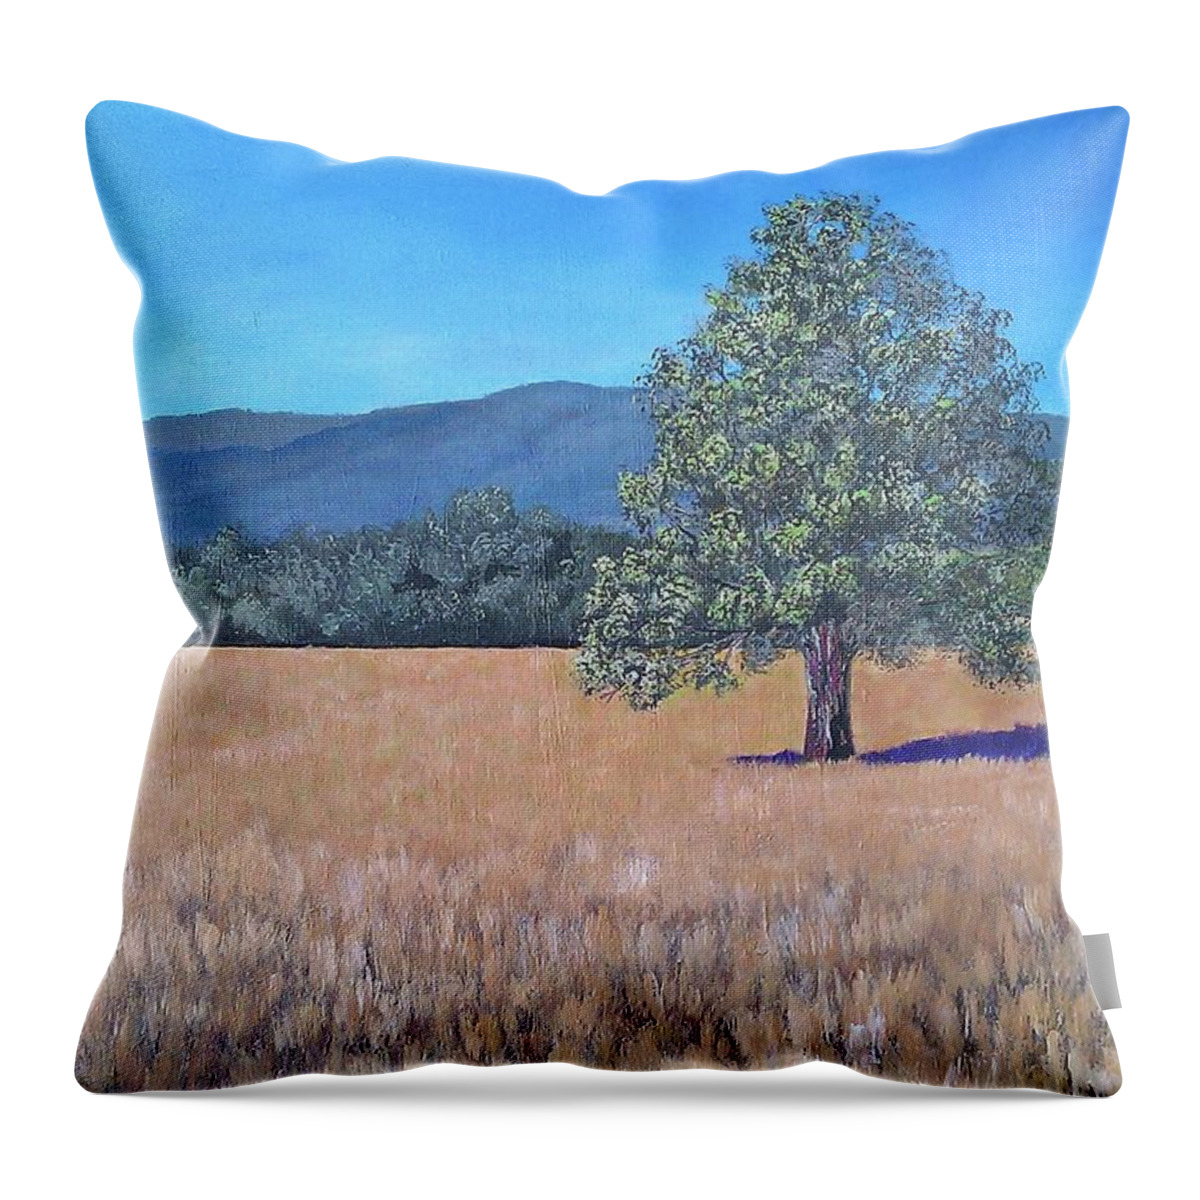 Oak Trees Throw Pillow featuring the painting The View by Suzanne Theis